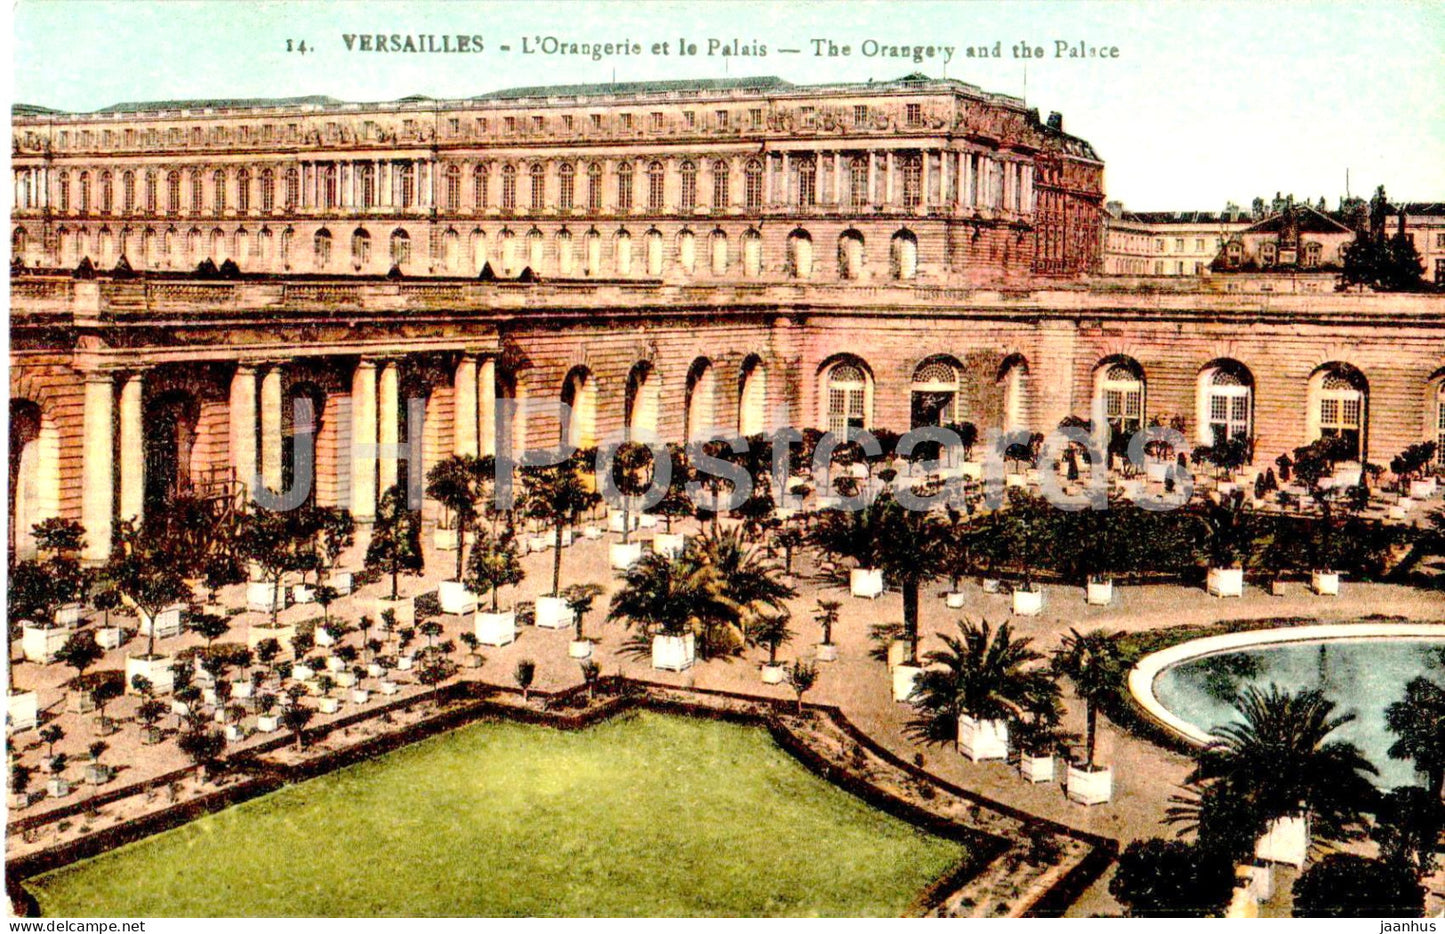 Versailles - L'Orangerie et le Palais  - The Orangery and the Palace - 14 - old postcard - 1932 - France - used - JH Postcards